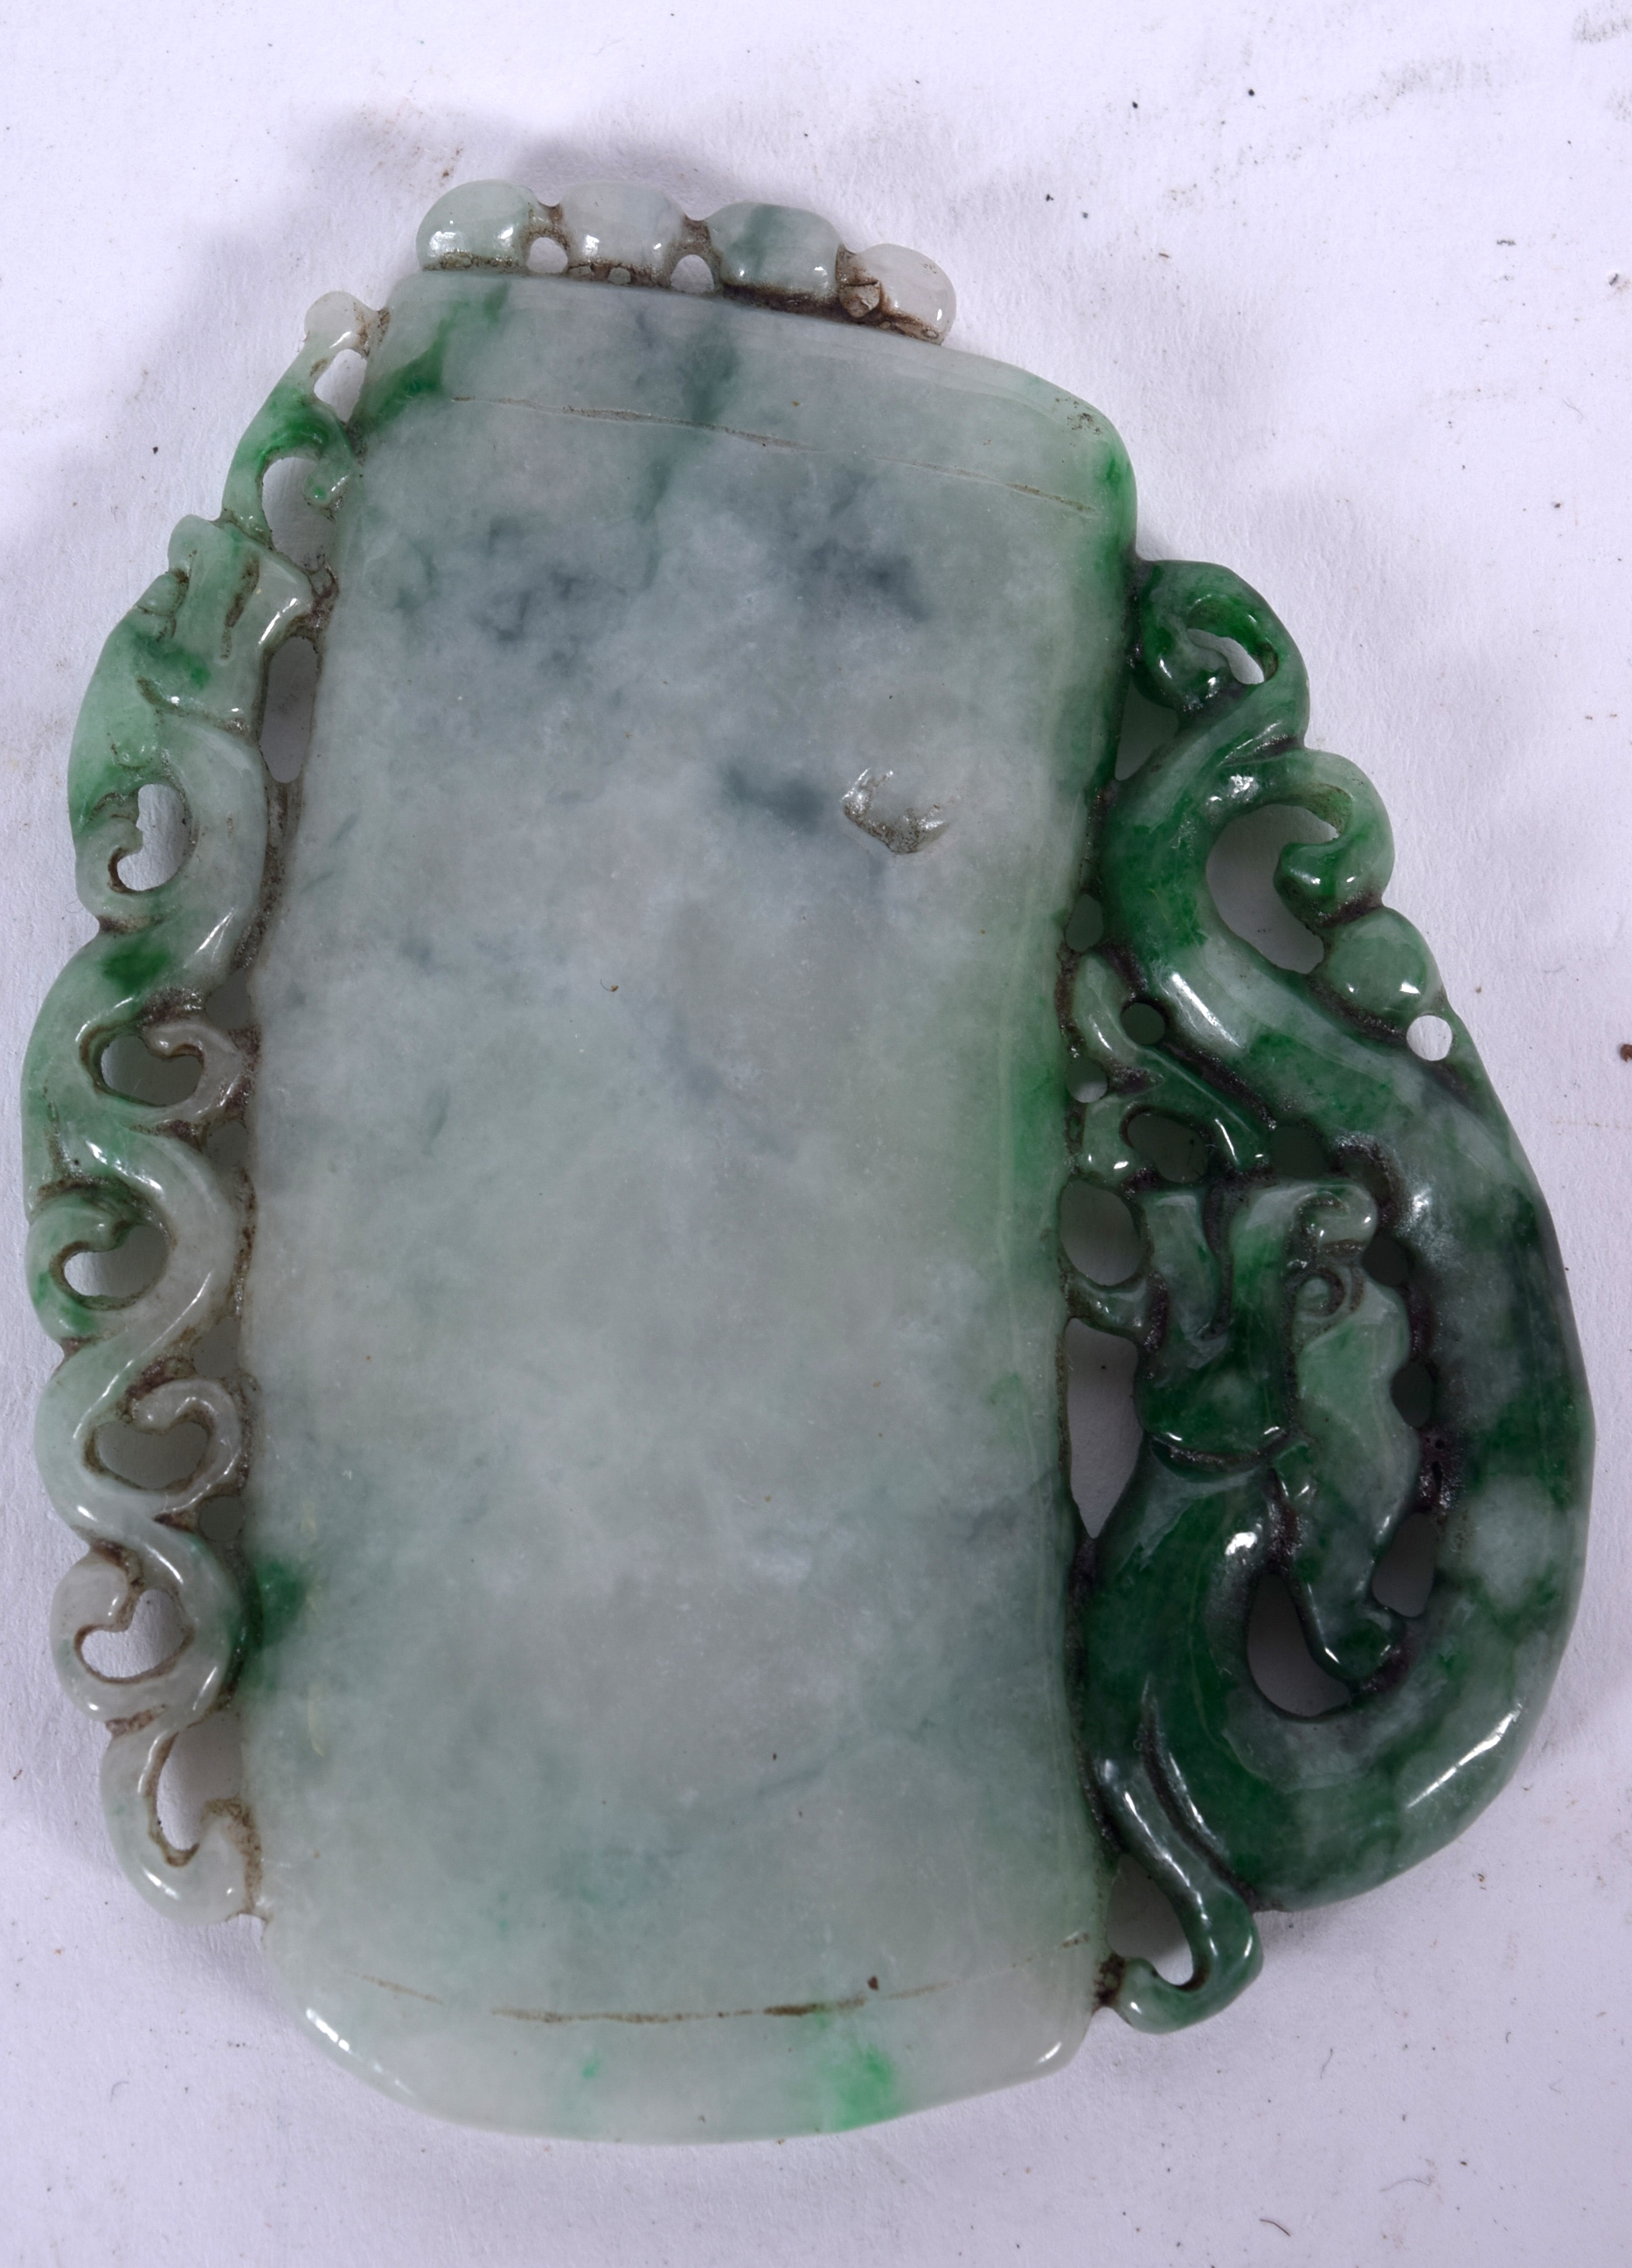 A CHINESE JADEITE CARVING, formed as a plain tablet with chilong clinging to one side. 7.5 cm x 5.7